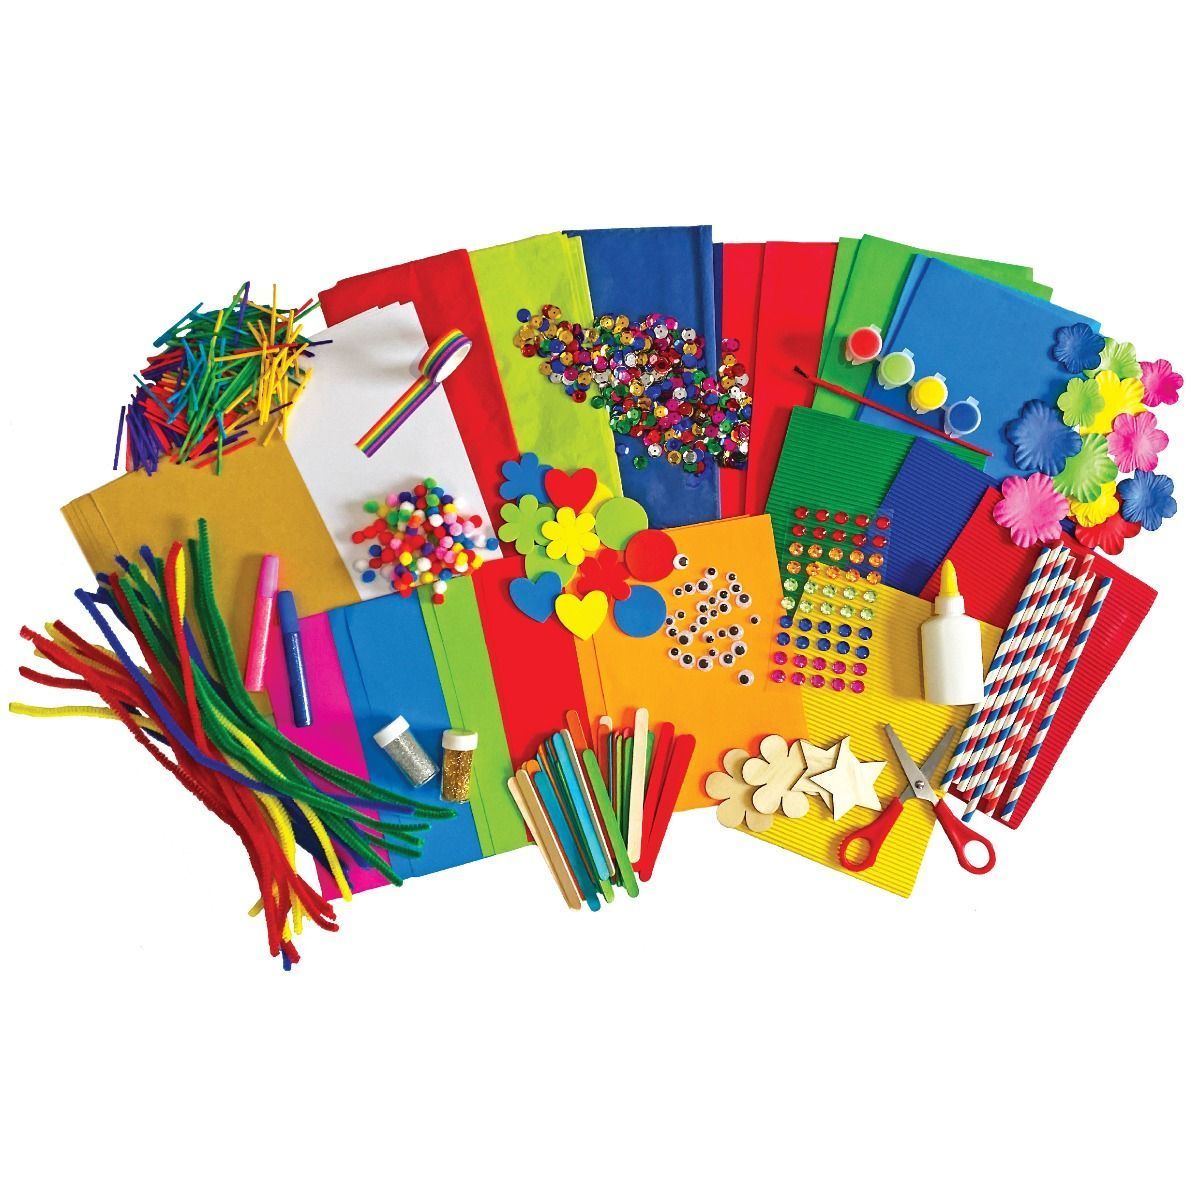 Kids Giant Craft Kit - 500 Assorted Pieces